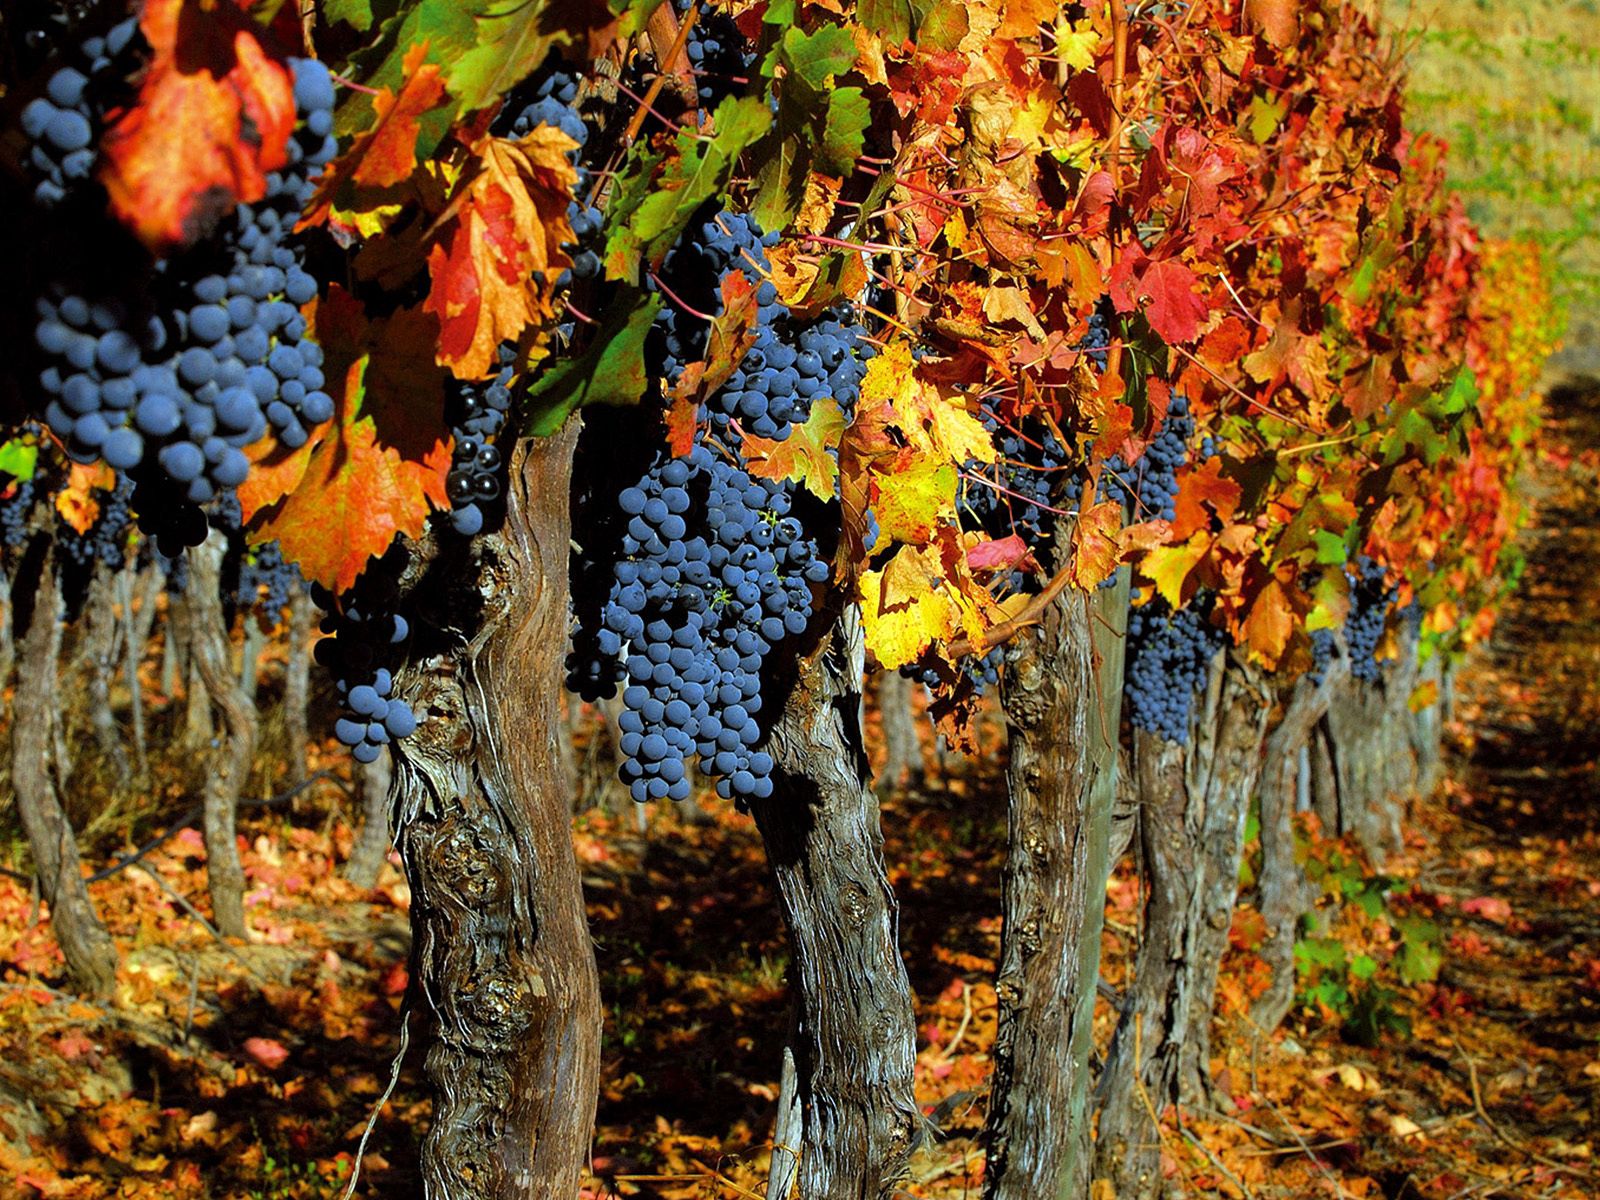 grapes, autumn, fruits, trees, food, leaves, bunches, clusters, harvest 4K Ultra